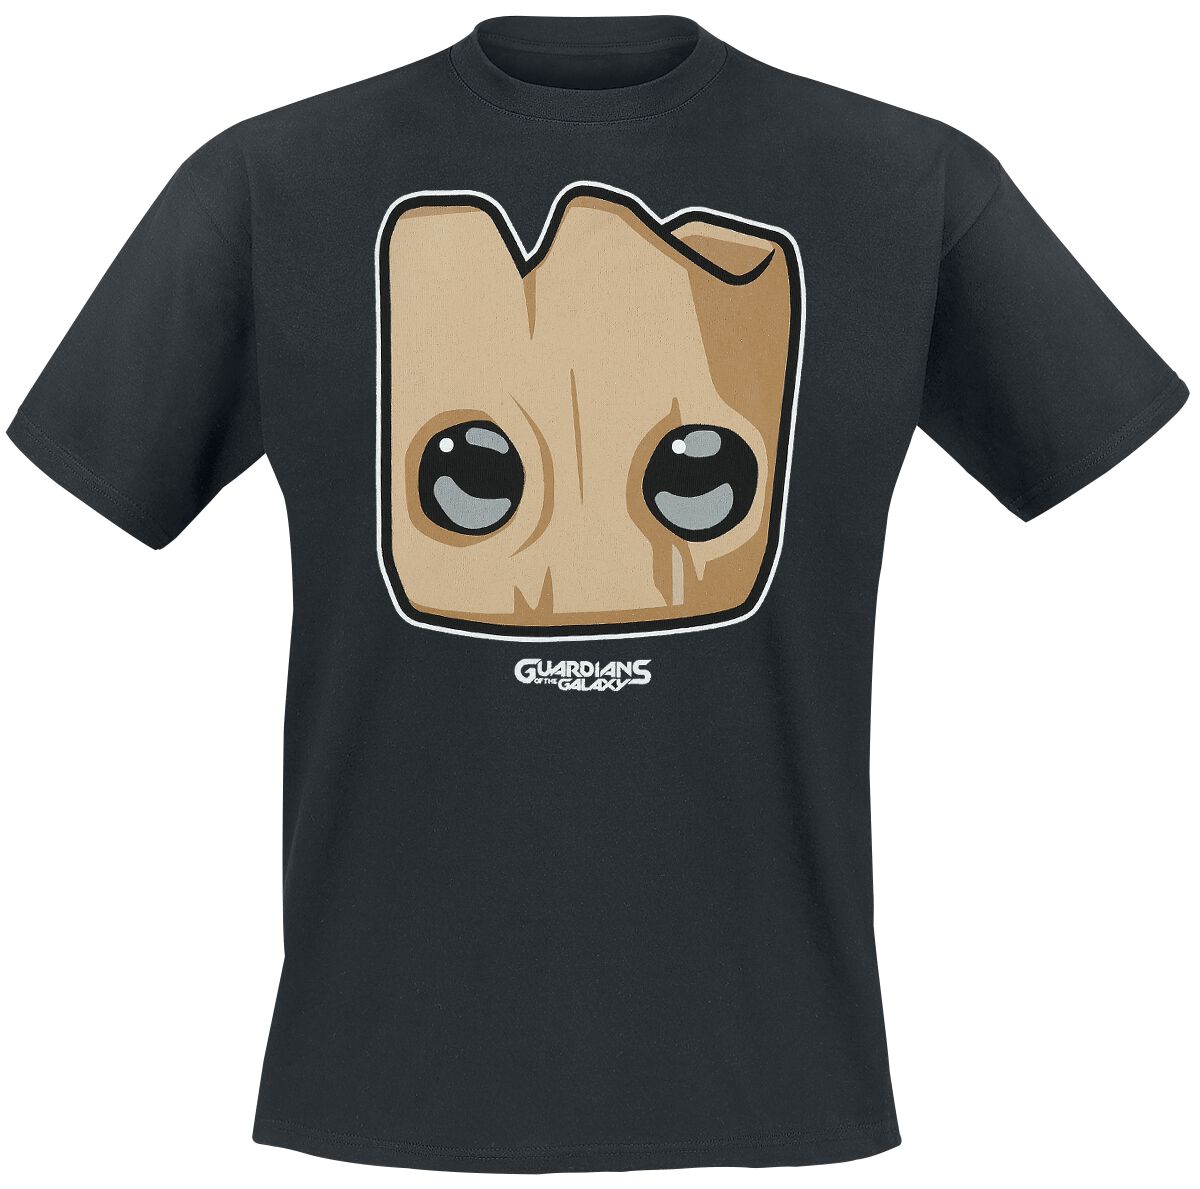 Guardians Of The Galaxy - Game - Groot Cute Face T-Shirt black